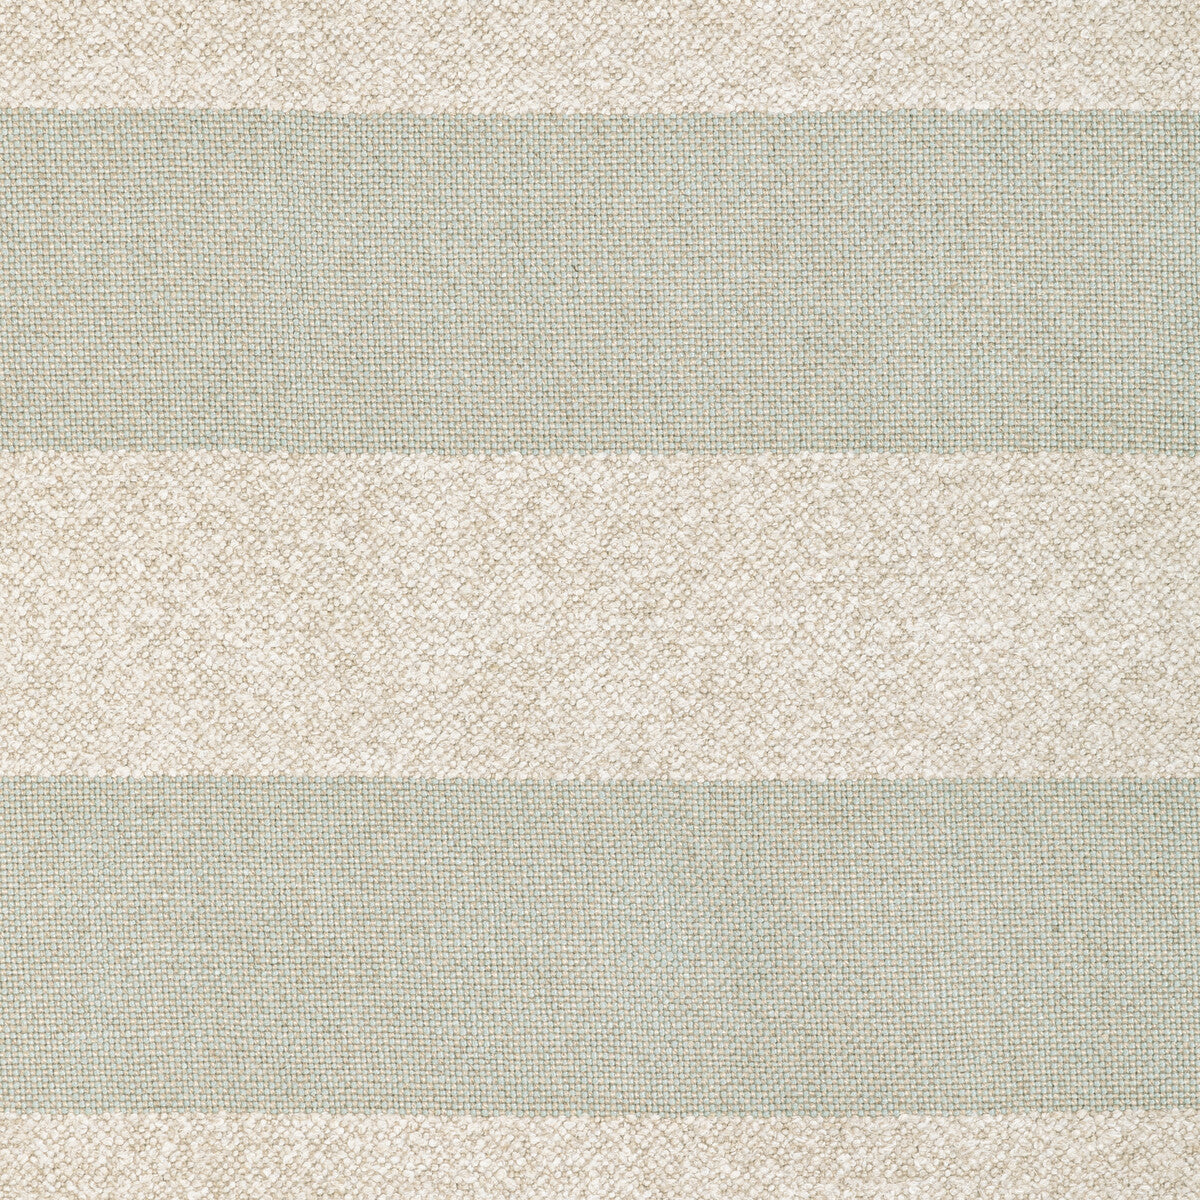 Summit Stripe fabric in agave color - pattern 36378.1630.0 - by Kravet Couture in the Barbara Barry Ojai collection